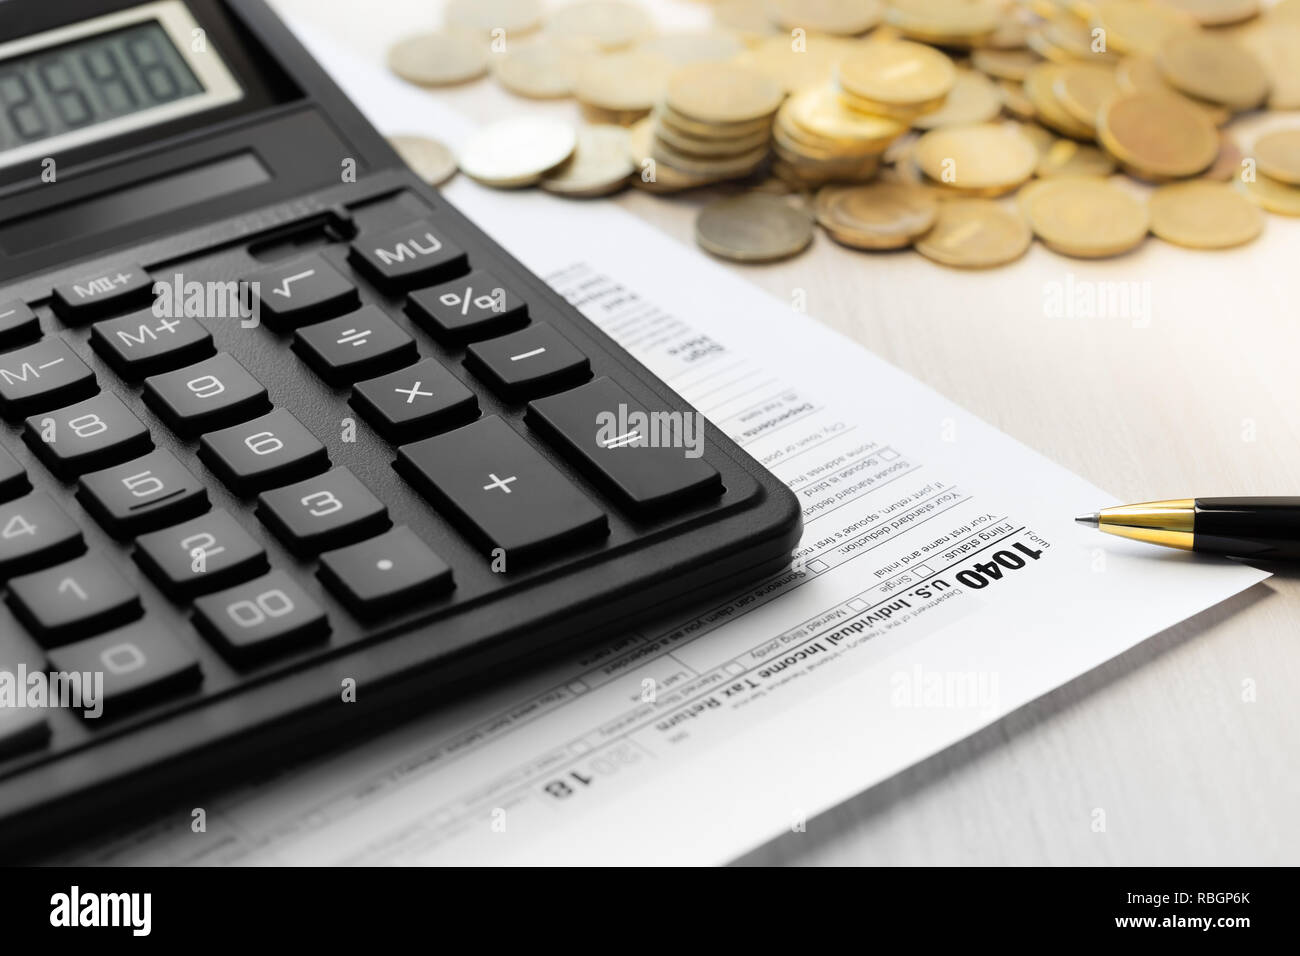 US 1040 tax form. Taxable period. Tax payment concept. Stock Photo